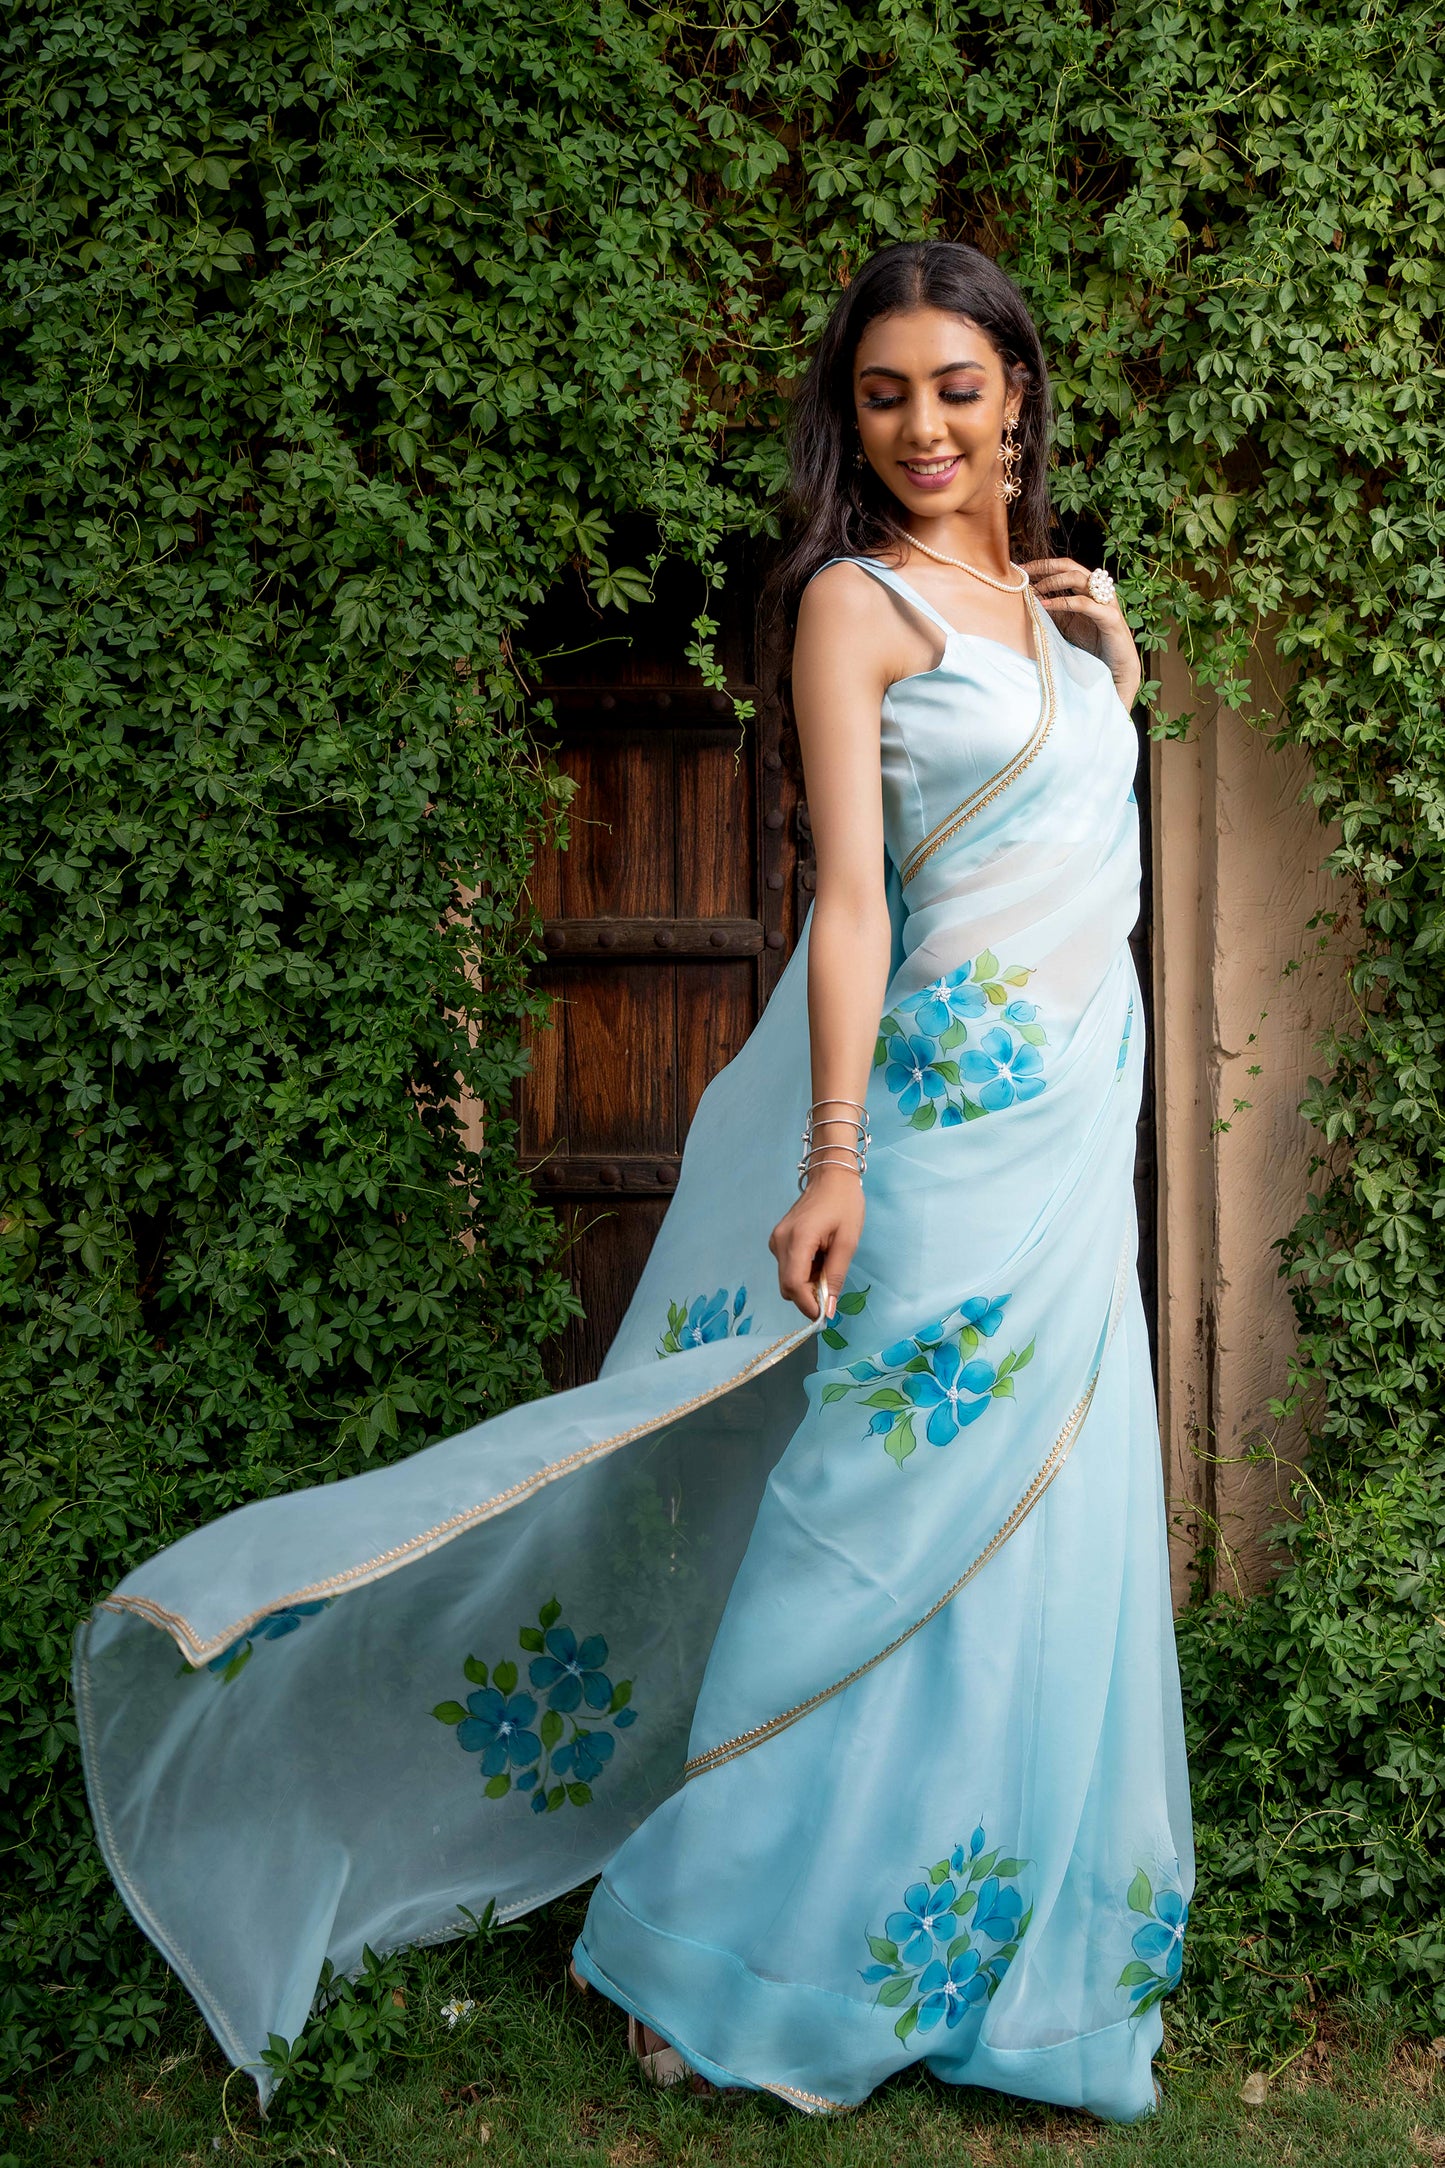 Capture the essence of elegance with this light turquoise Plumeria hand-painted organza saree from our latest collection. This handwork saree is the most popular and trending saree designs. Complete with a stitched blouse, this fancy organza saree is a testament to timeless beauty, reminiscent of Bollywood and Sabyasachi styles. Elevate your wardrobe with this beautiful handloom saree, the epitome of sophistication and grace, now available in our latest design series